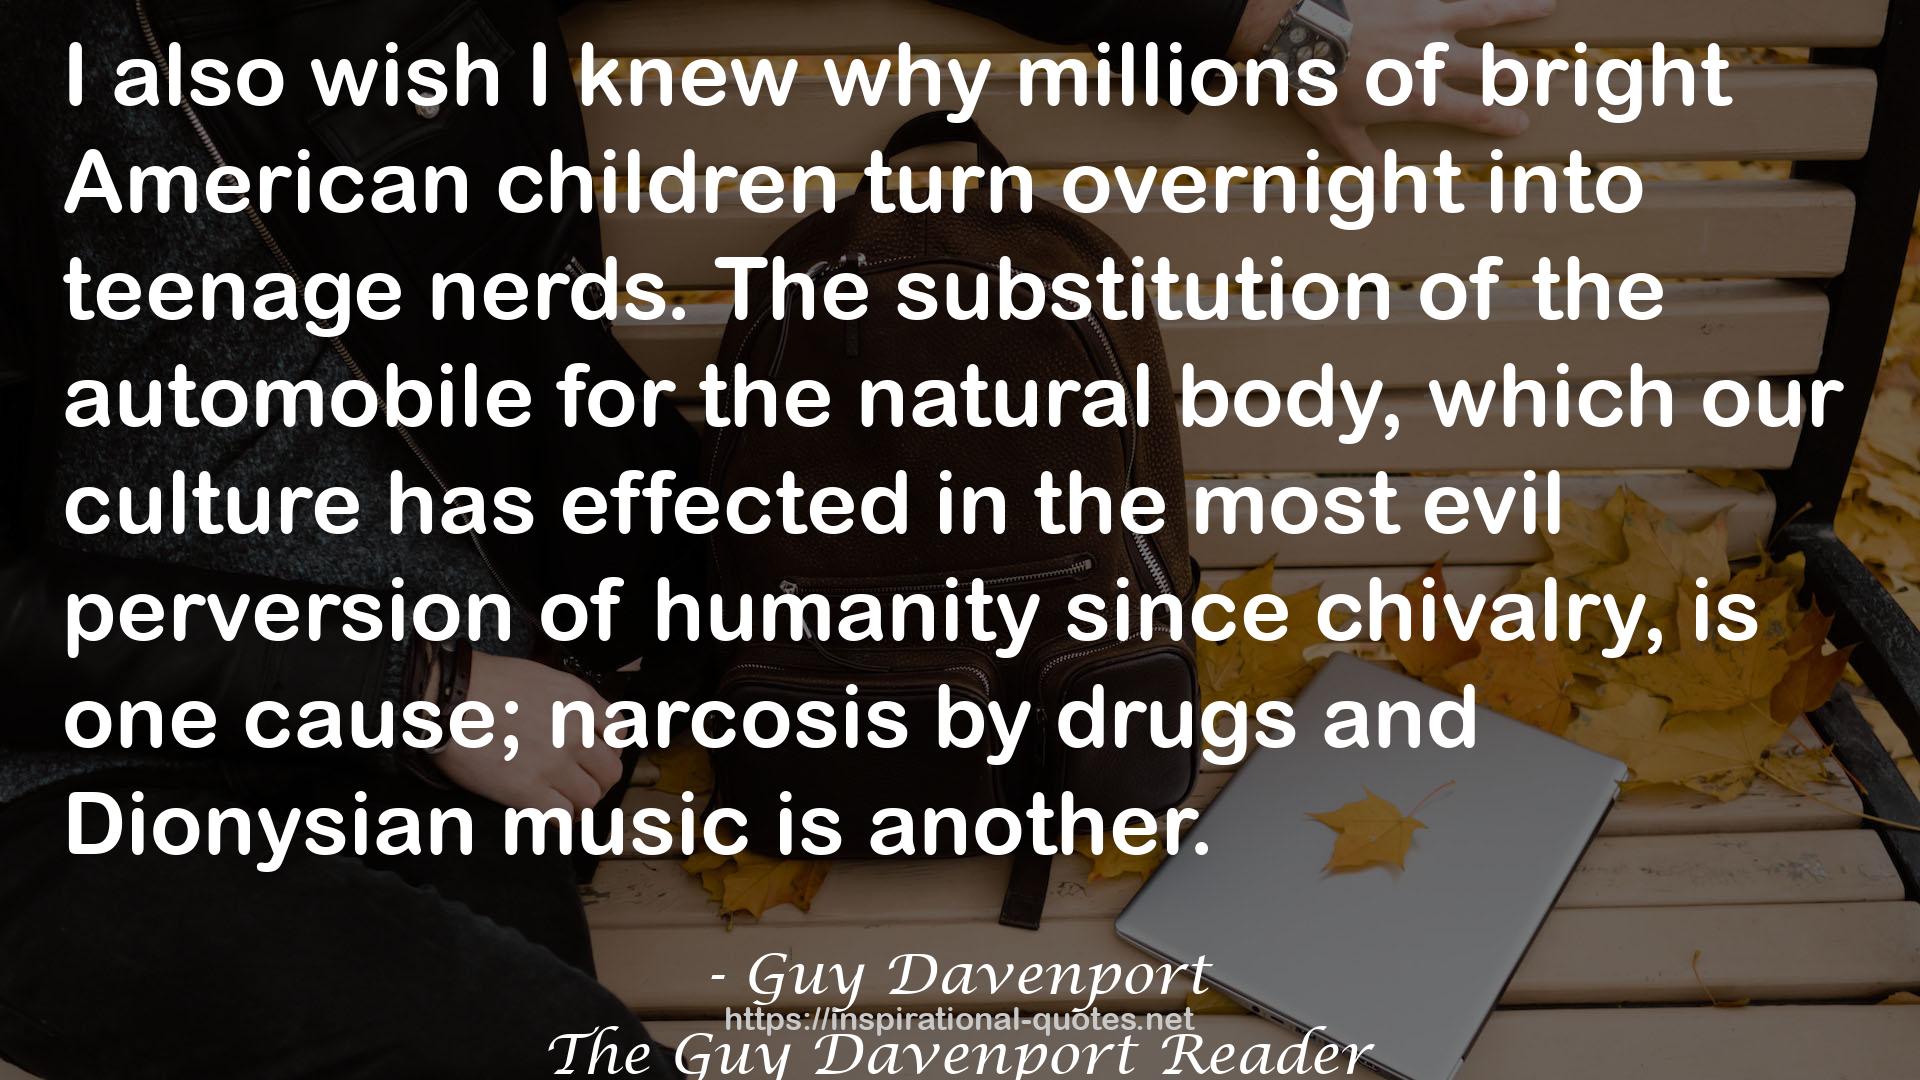 The Guy Davenport Reader QUOTES